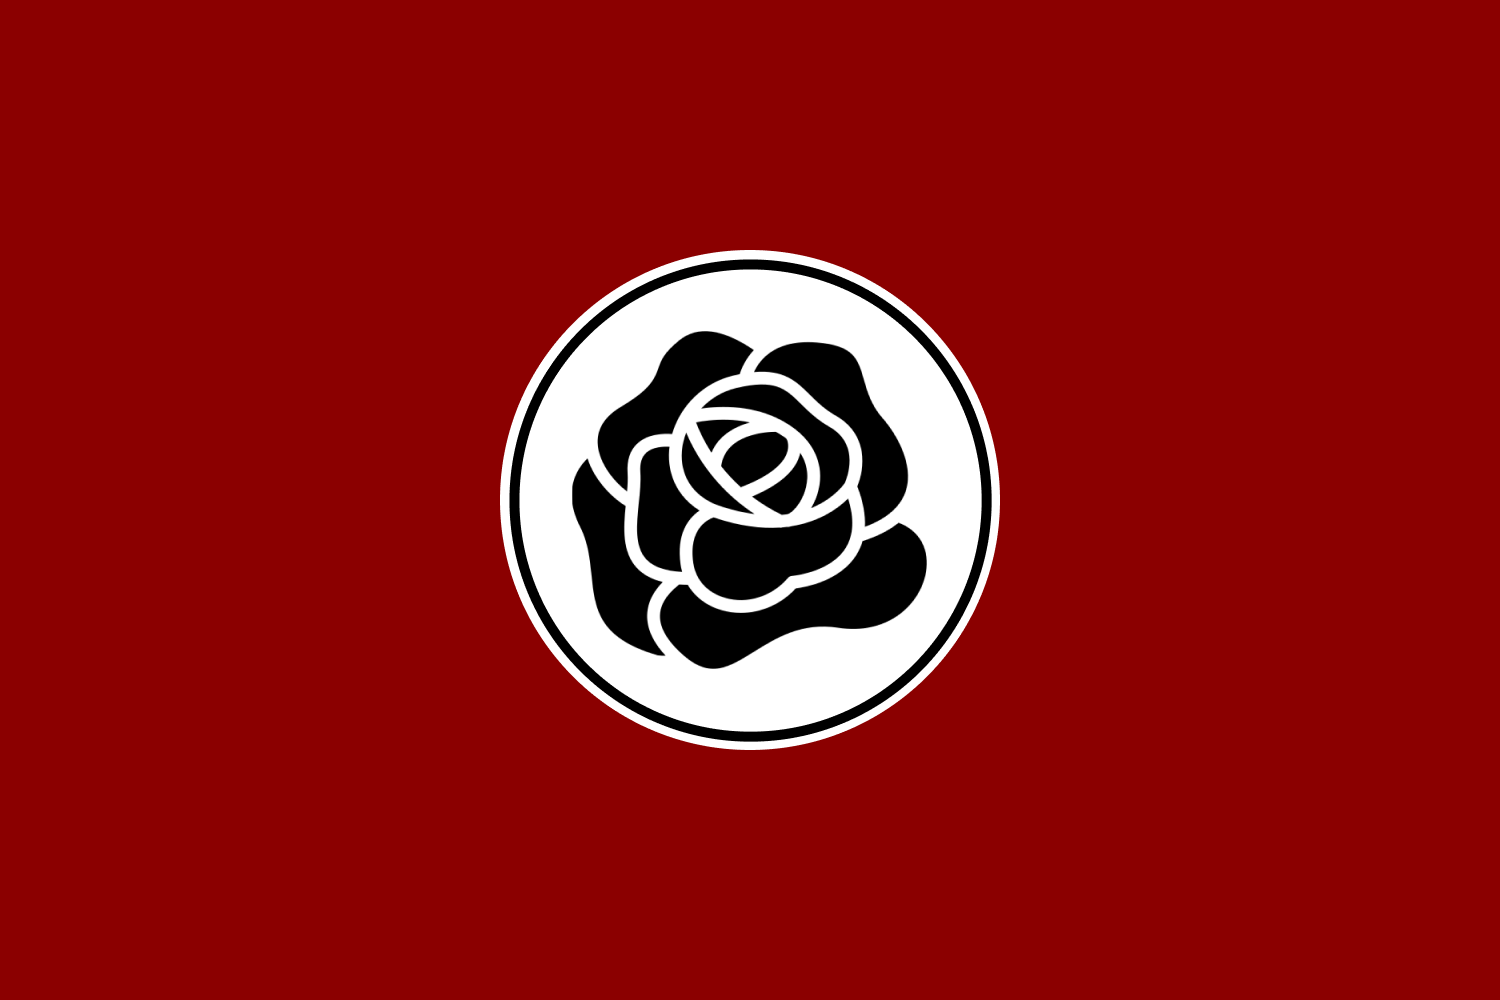 a red flag with a white circle and black rose in the center